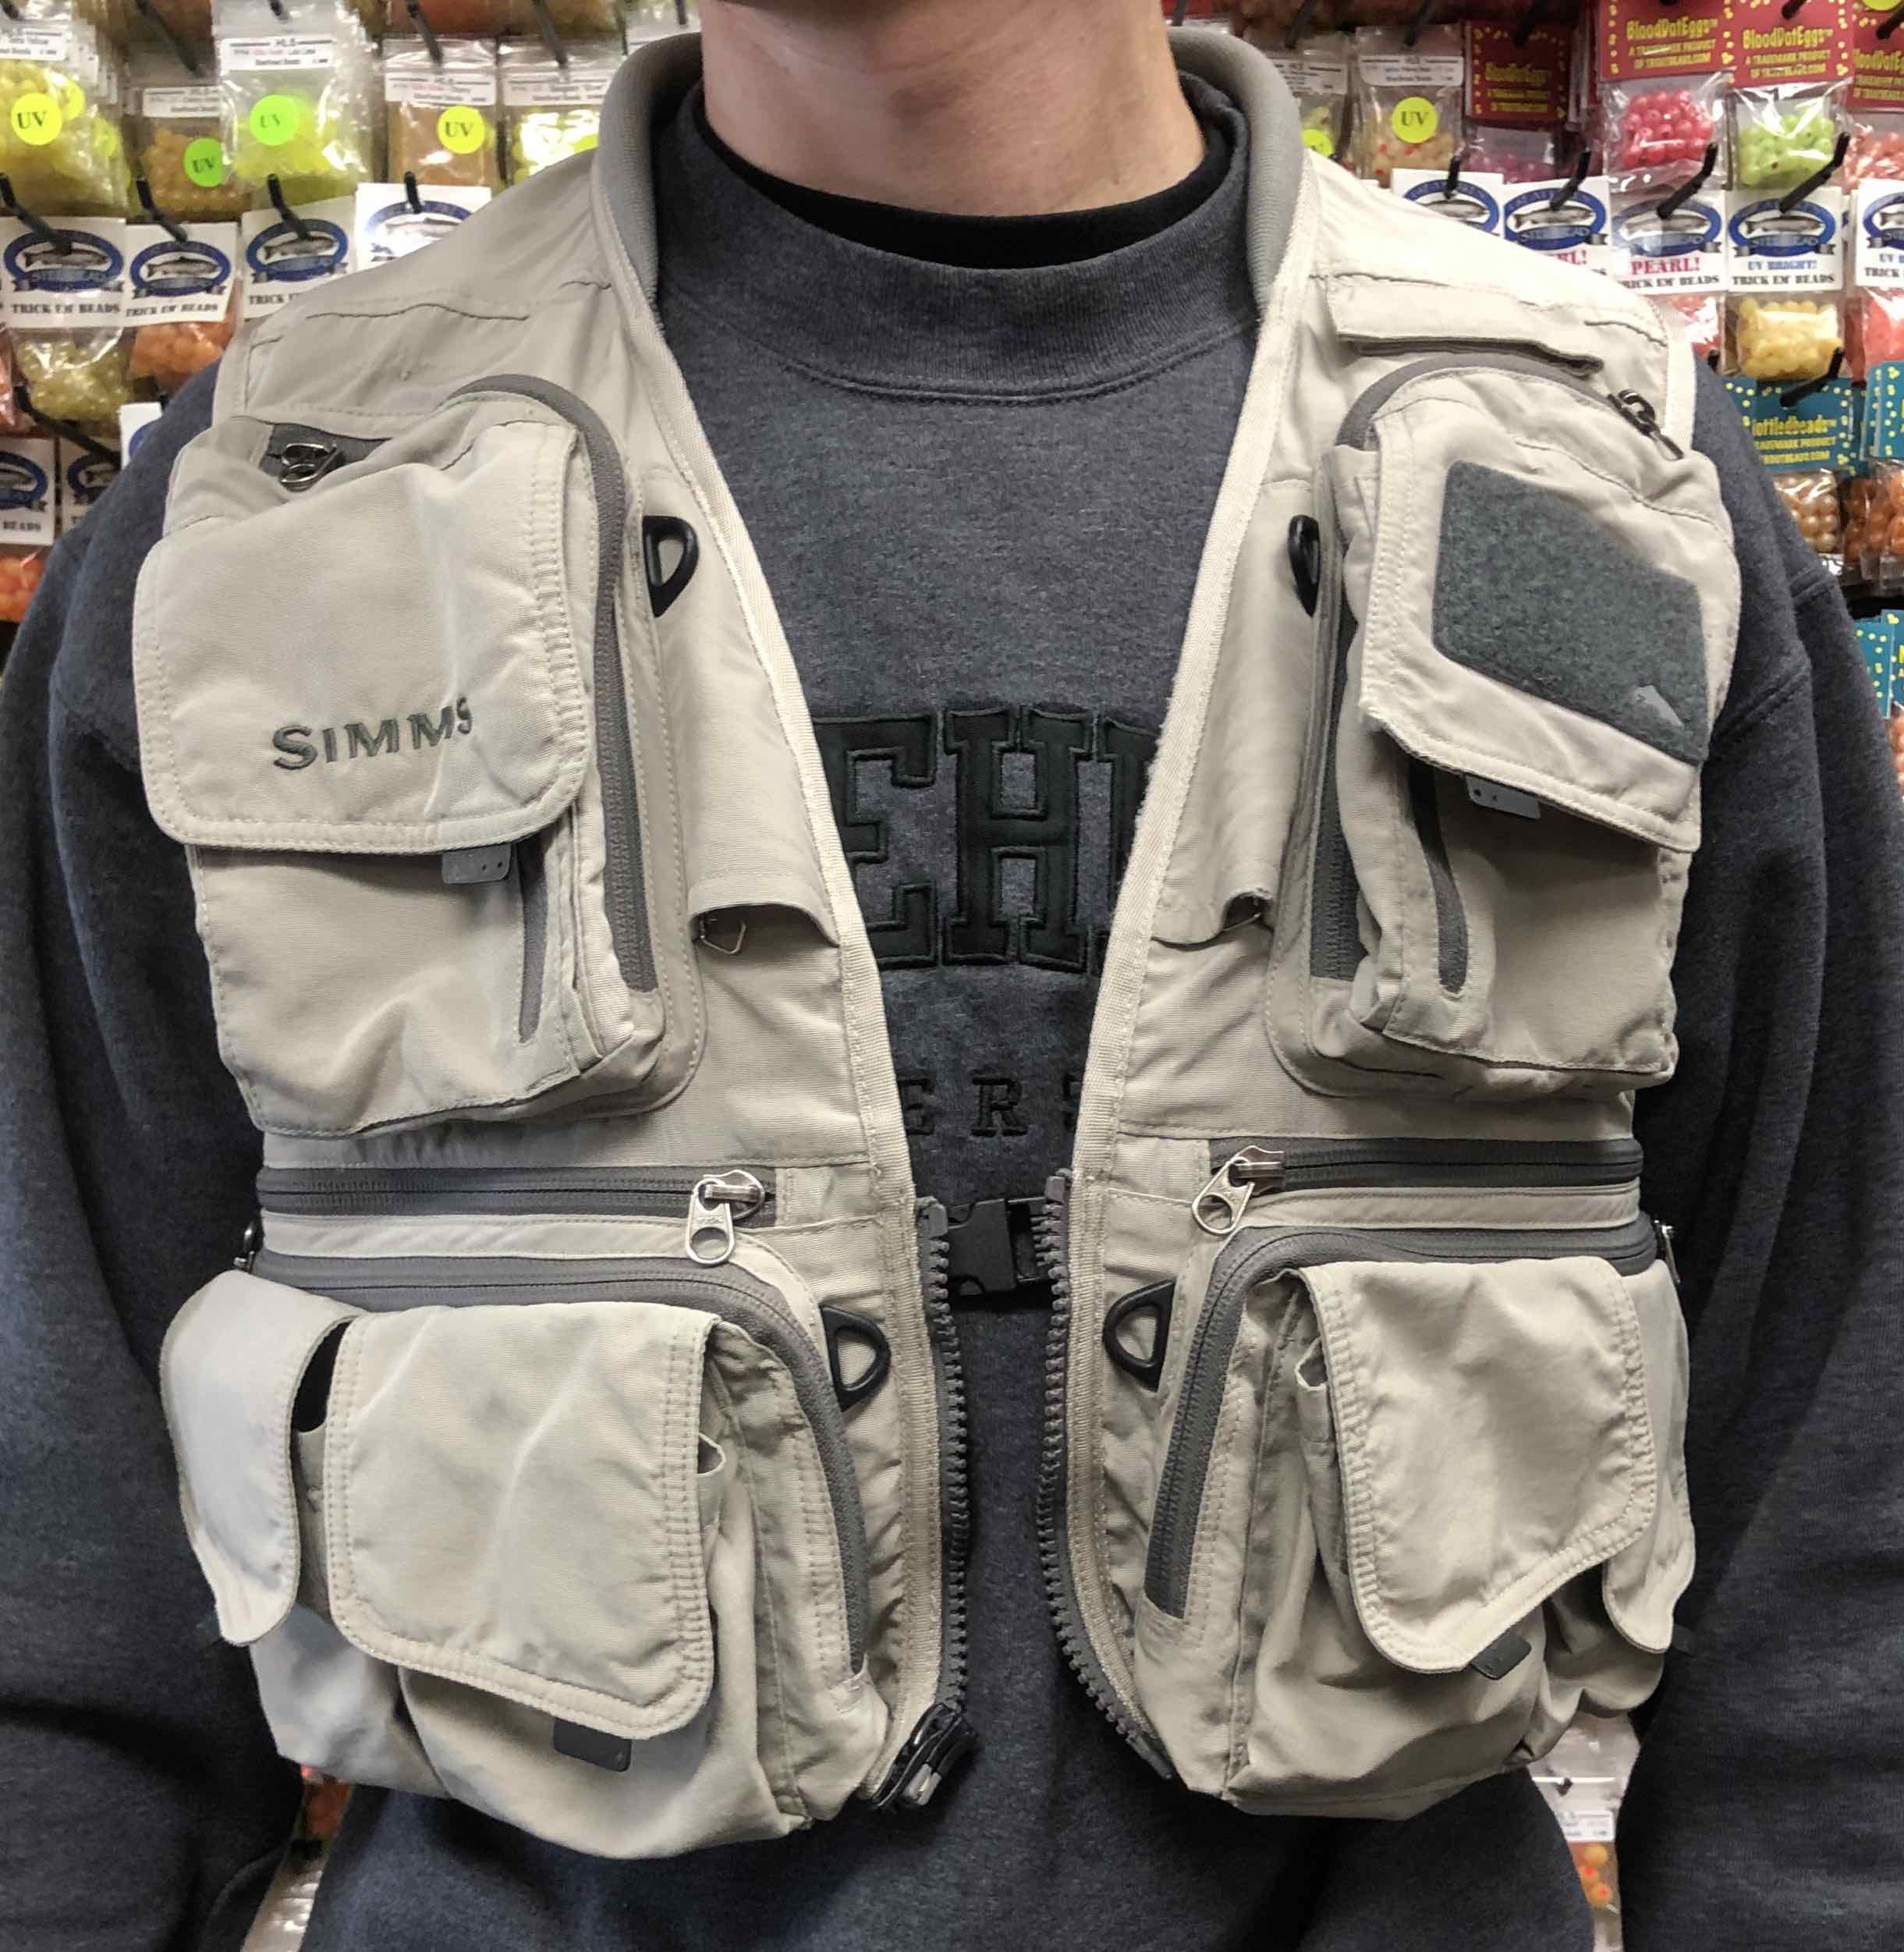 https://thefirstcast.ca/wp-content/uploads/2019/03/Simms-G3-Guide-Vest-Size-Small-BB.jpg